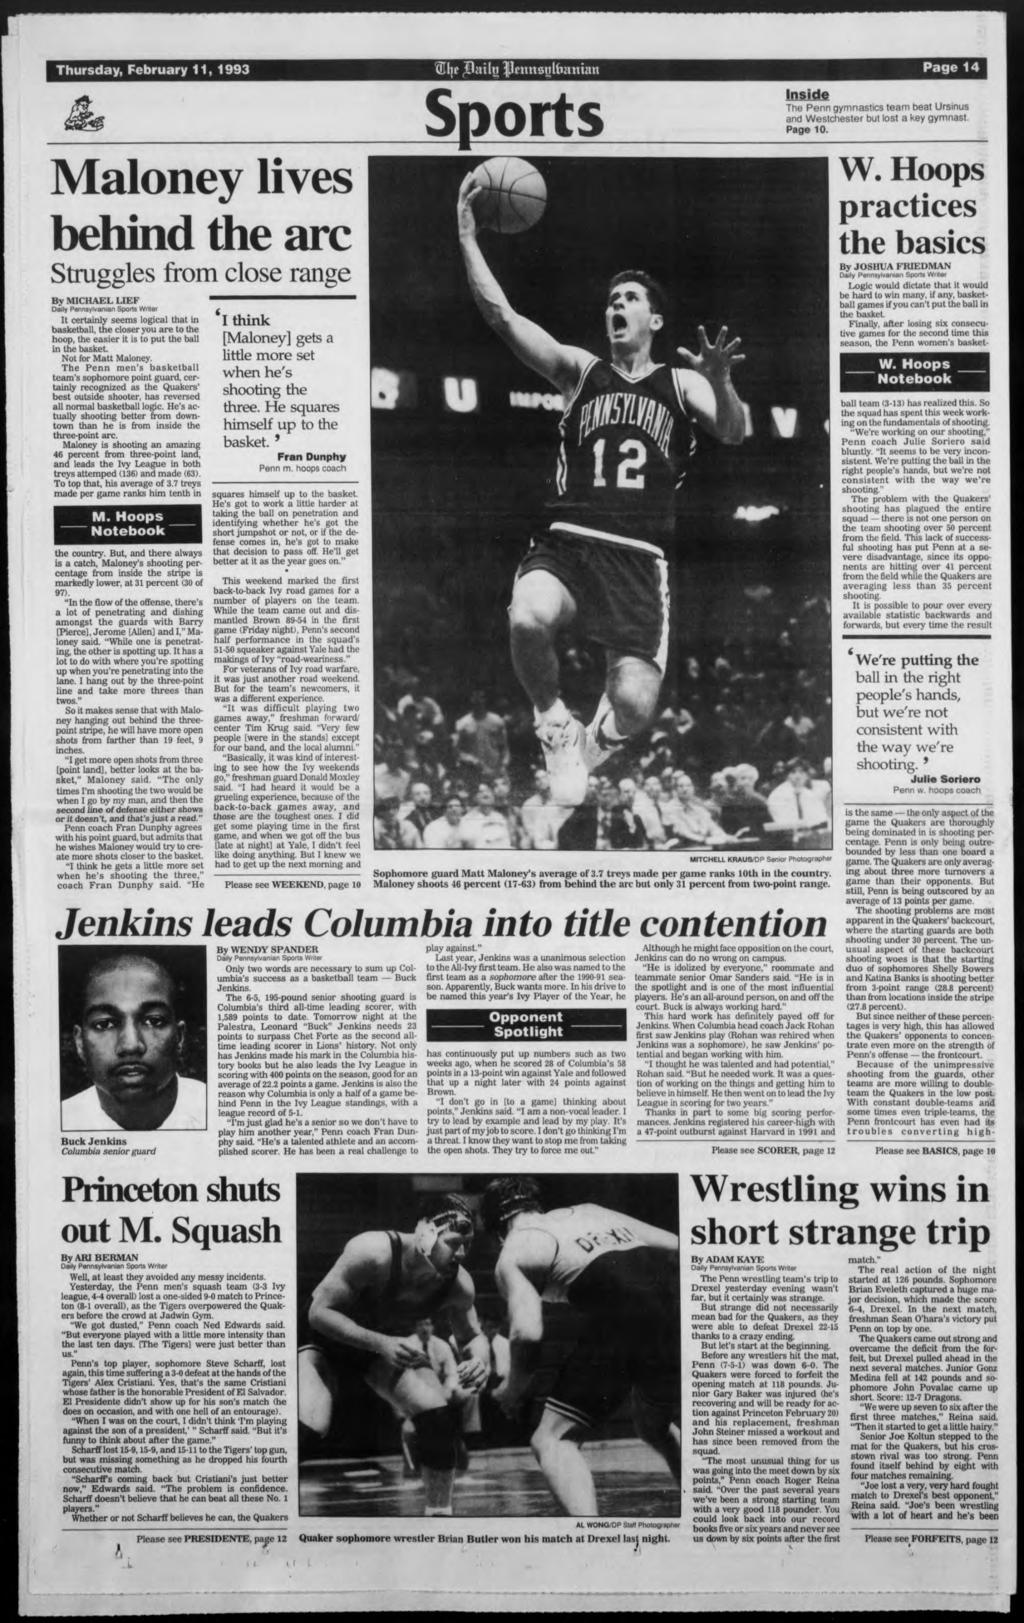 Thursday, February 11,1993 Maloney lves behnd the arc Struggles from close range By MICHAEL LIEF Daly Pennsylvanan Sports Wrter It certanly seems logcal that n basketball, the closer you are to the